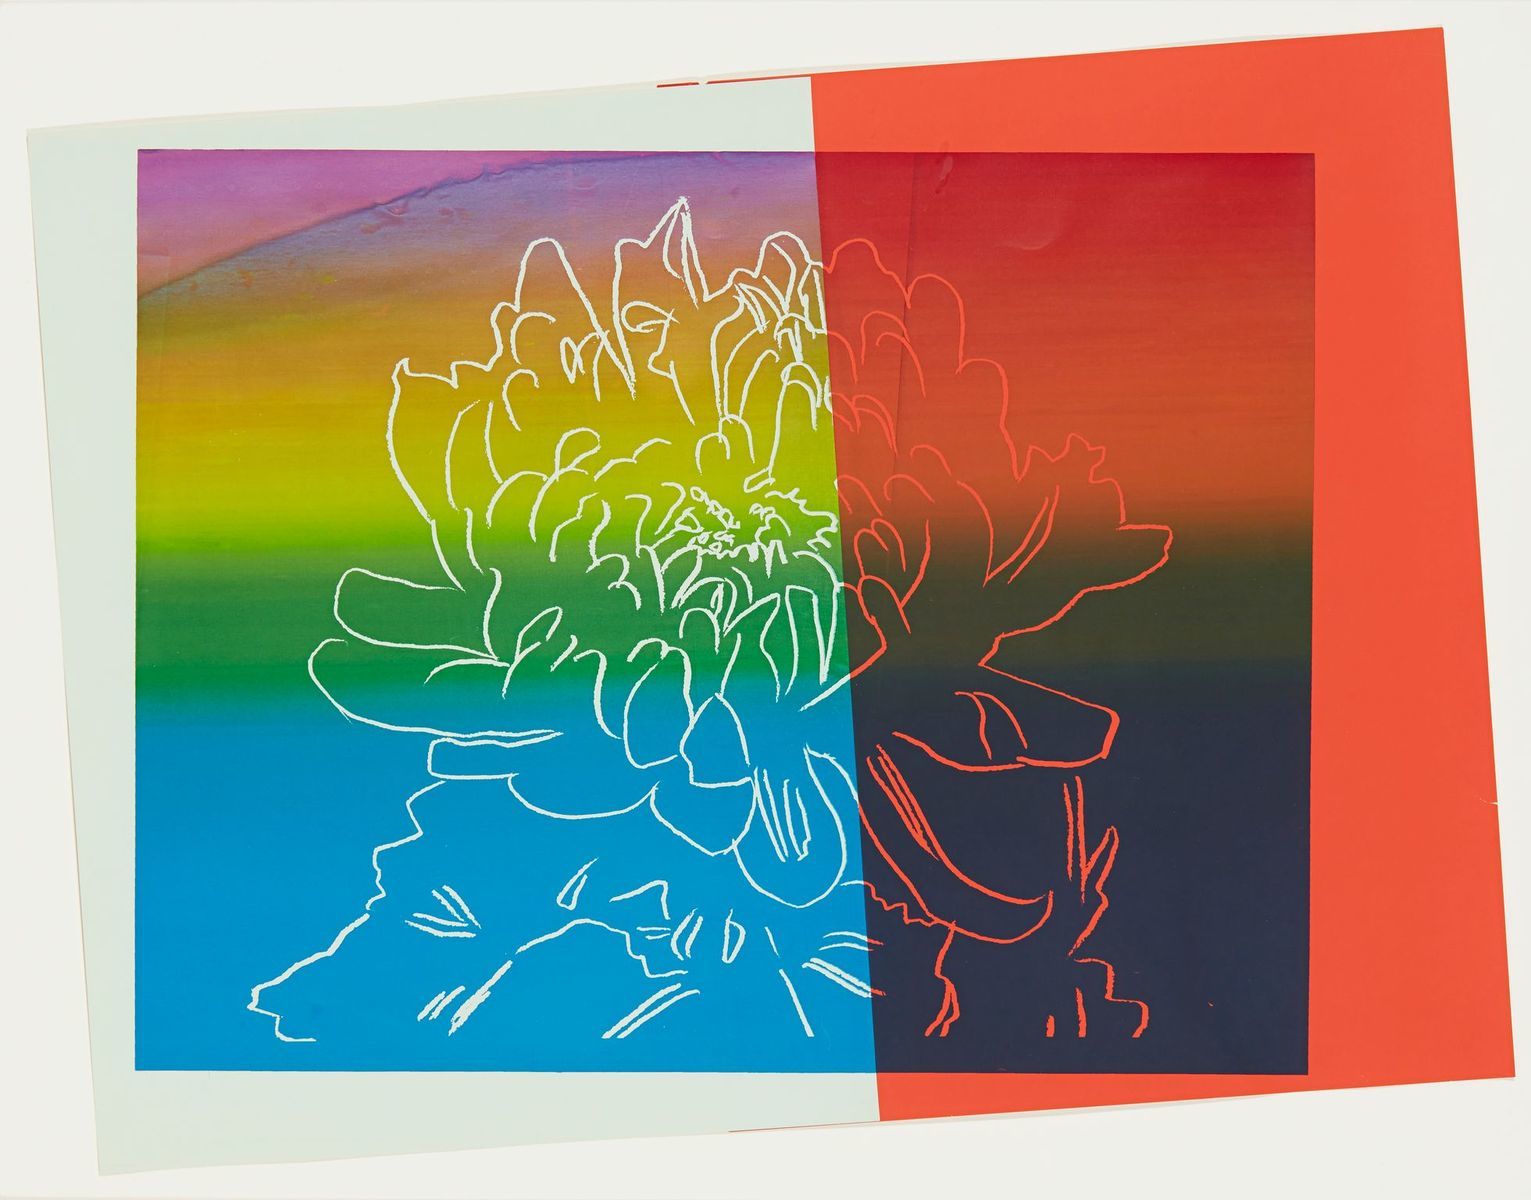 Art collectors are dabbling in print such as this Andy Warhol due to go under hammer